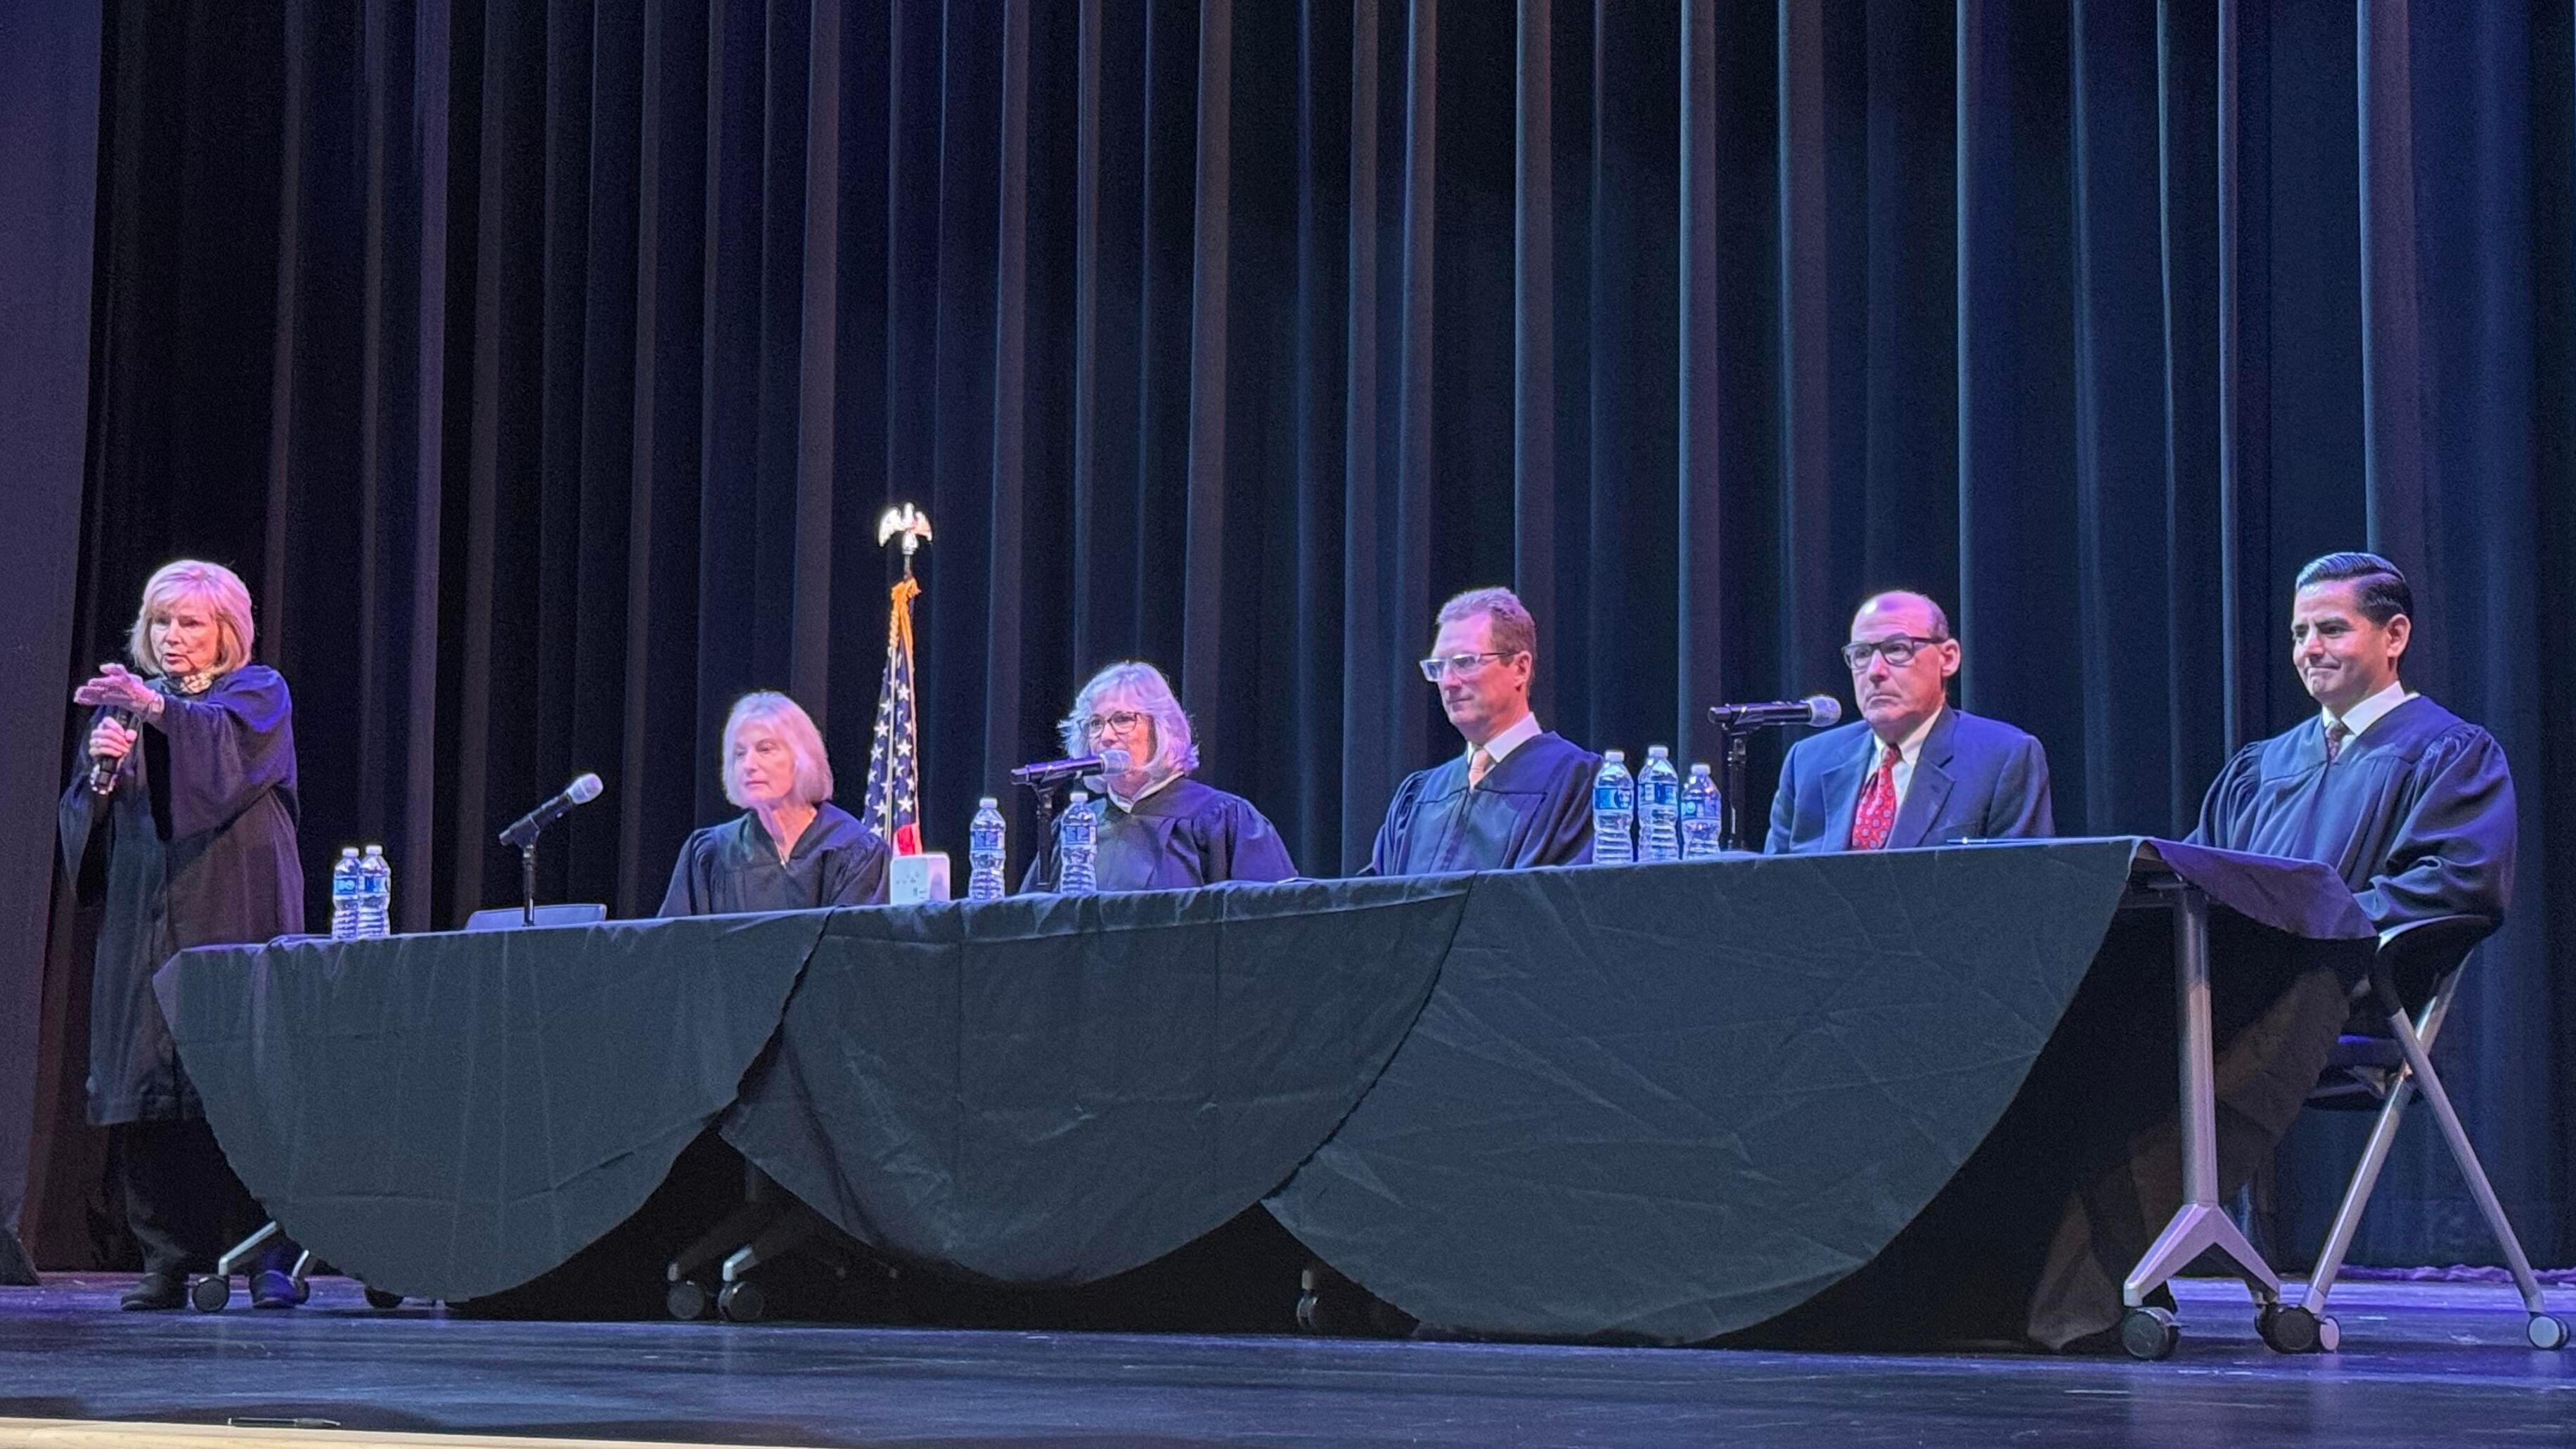 The Court of Appeal, Fourth Appellate District, Division One, held a special oral argument session on Feb. 28 at Crawford High School.